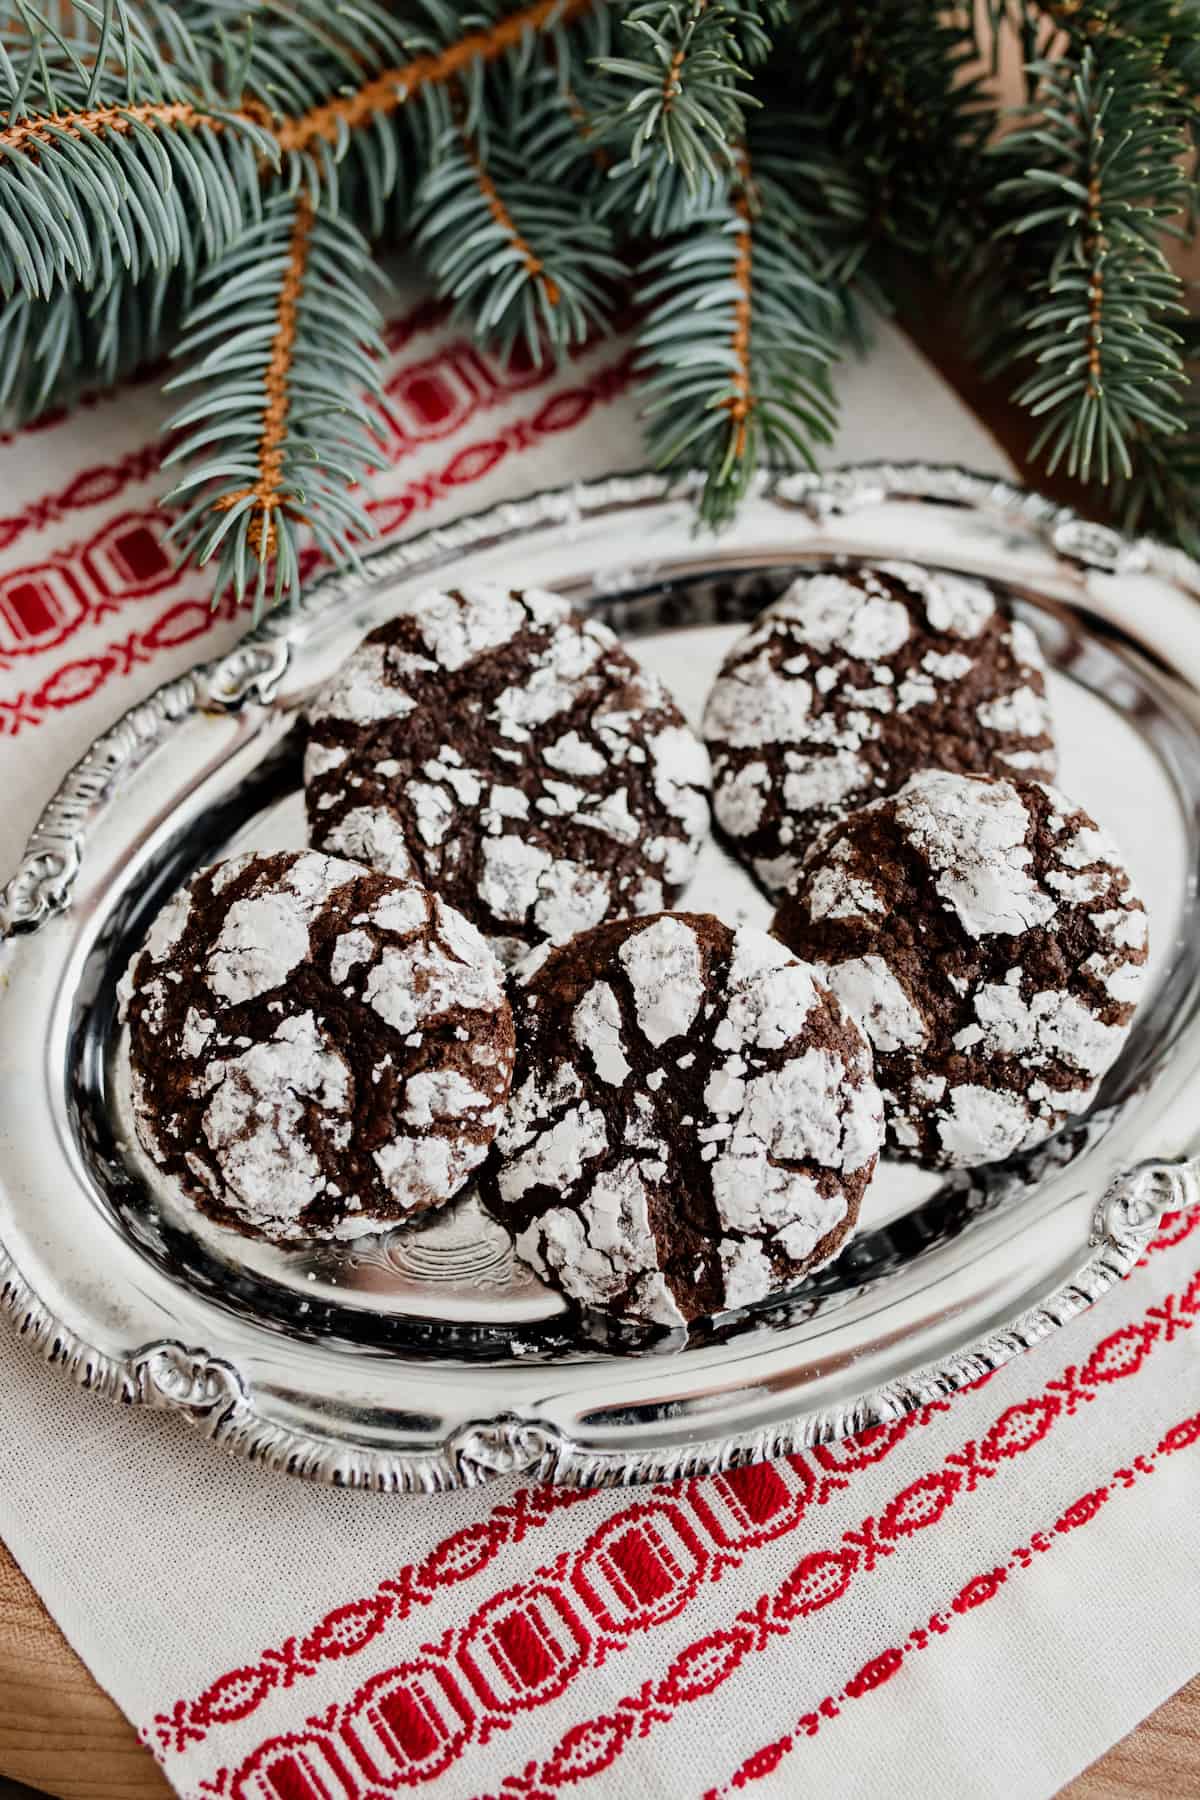 Mexican chocolate crinkle cookies on an oval silver platter on top of a red and white tea towel with a pine branch.